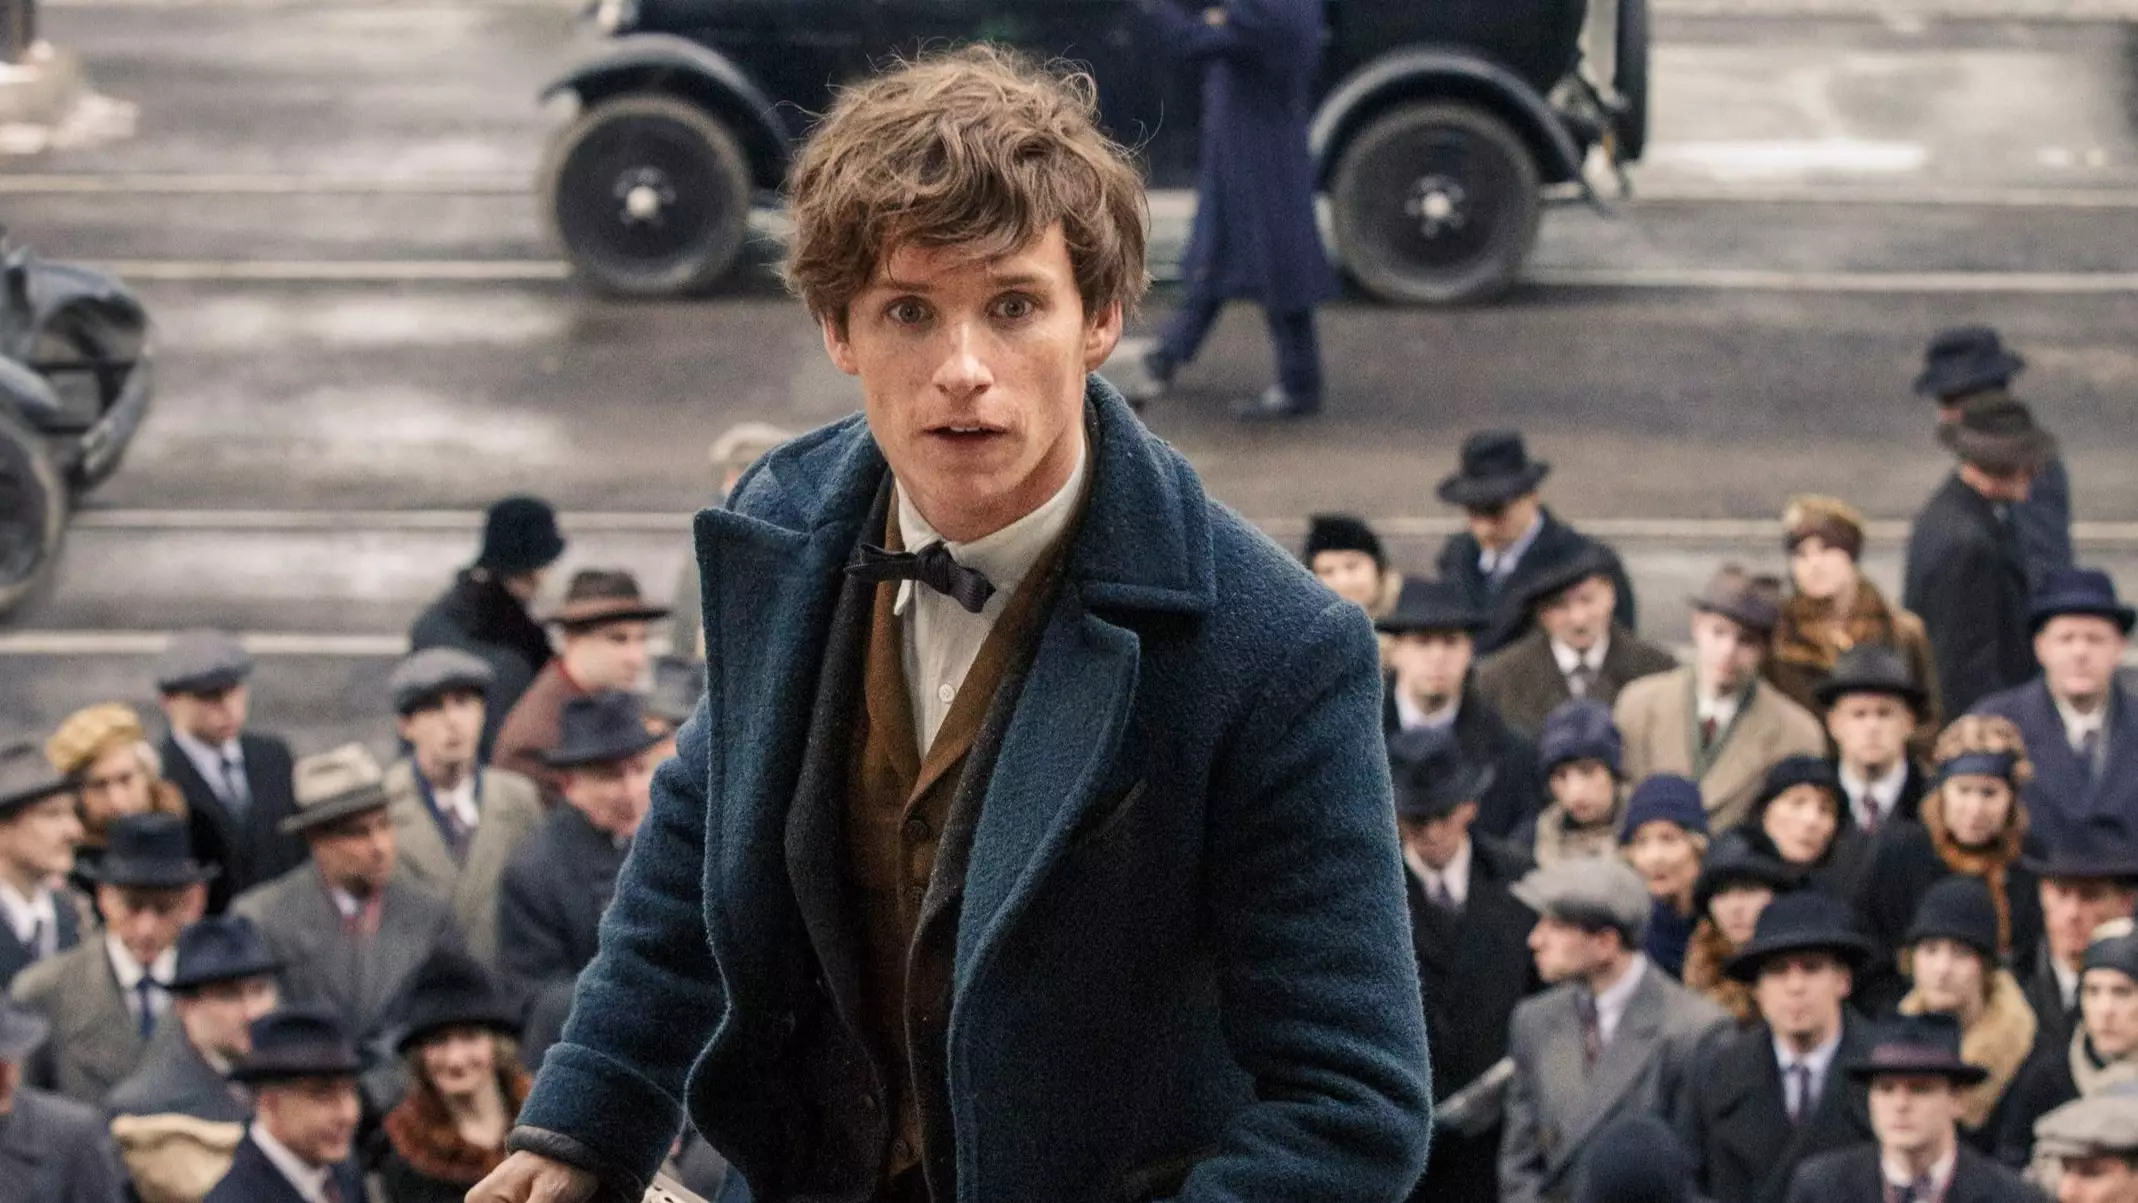 Eddie Redmayne Confirms 'Fantastic Beasts 3' Has Officially Started Filming 